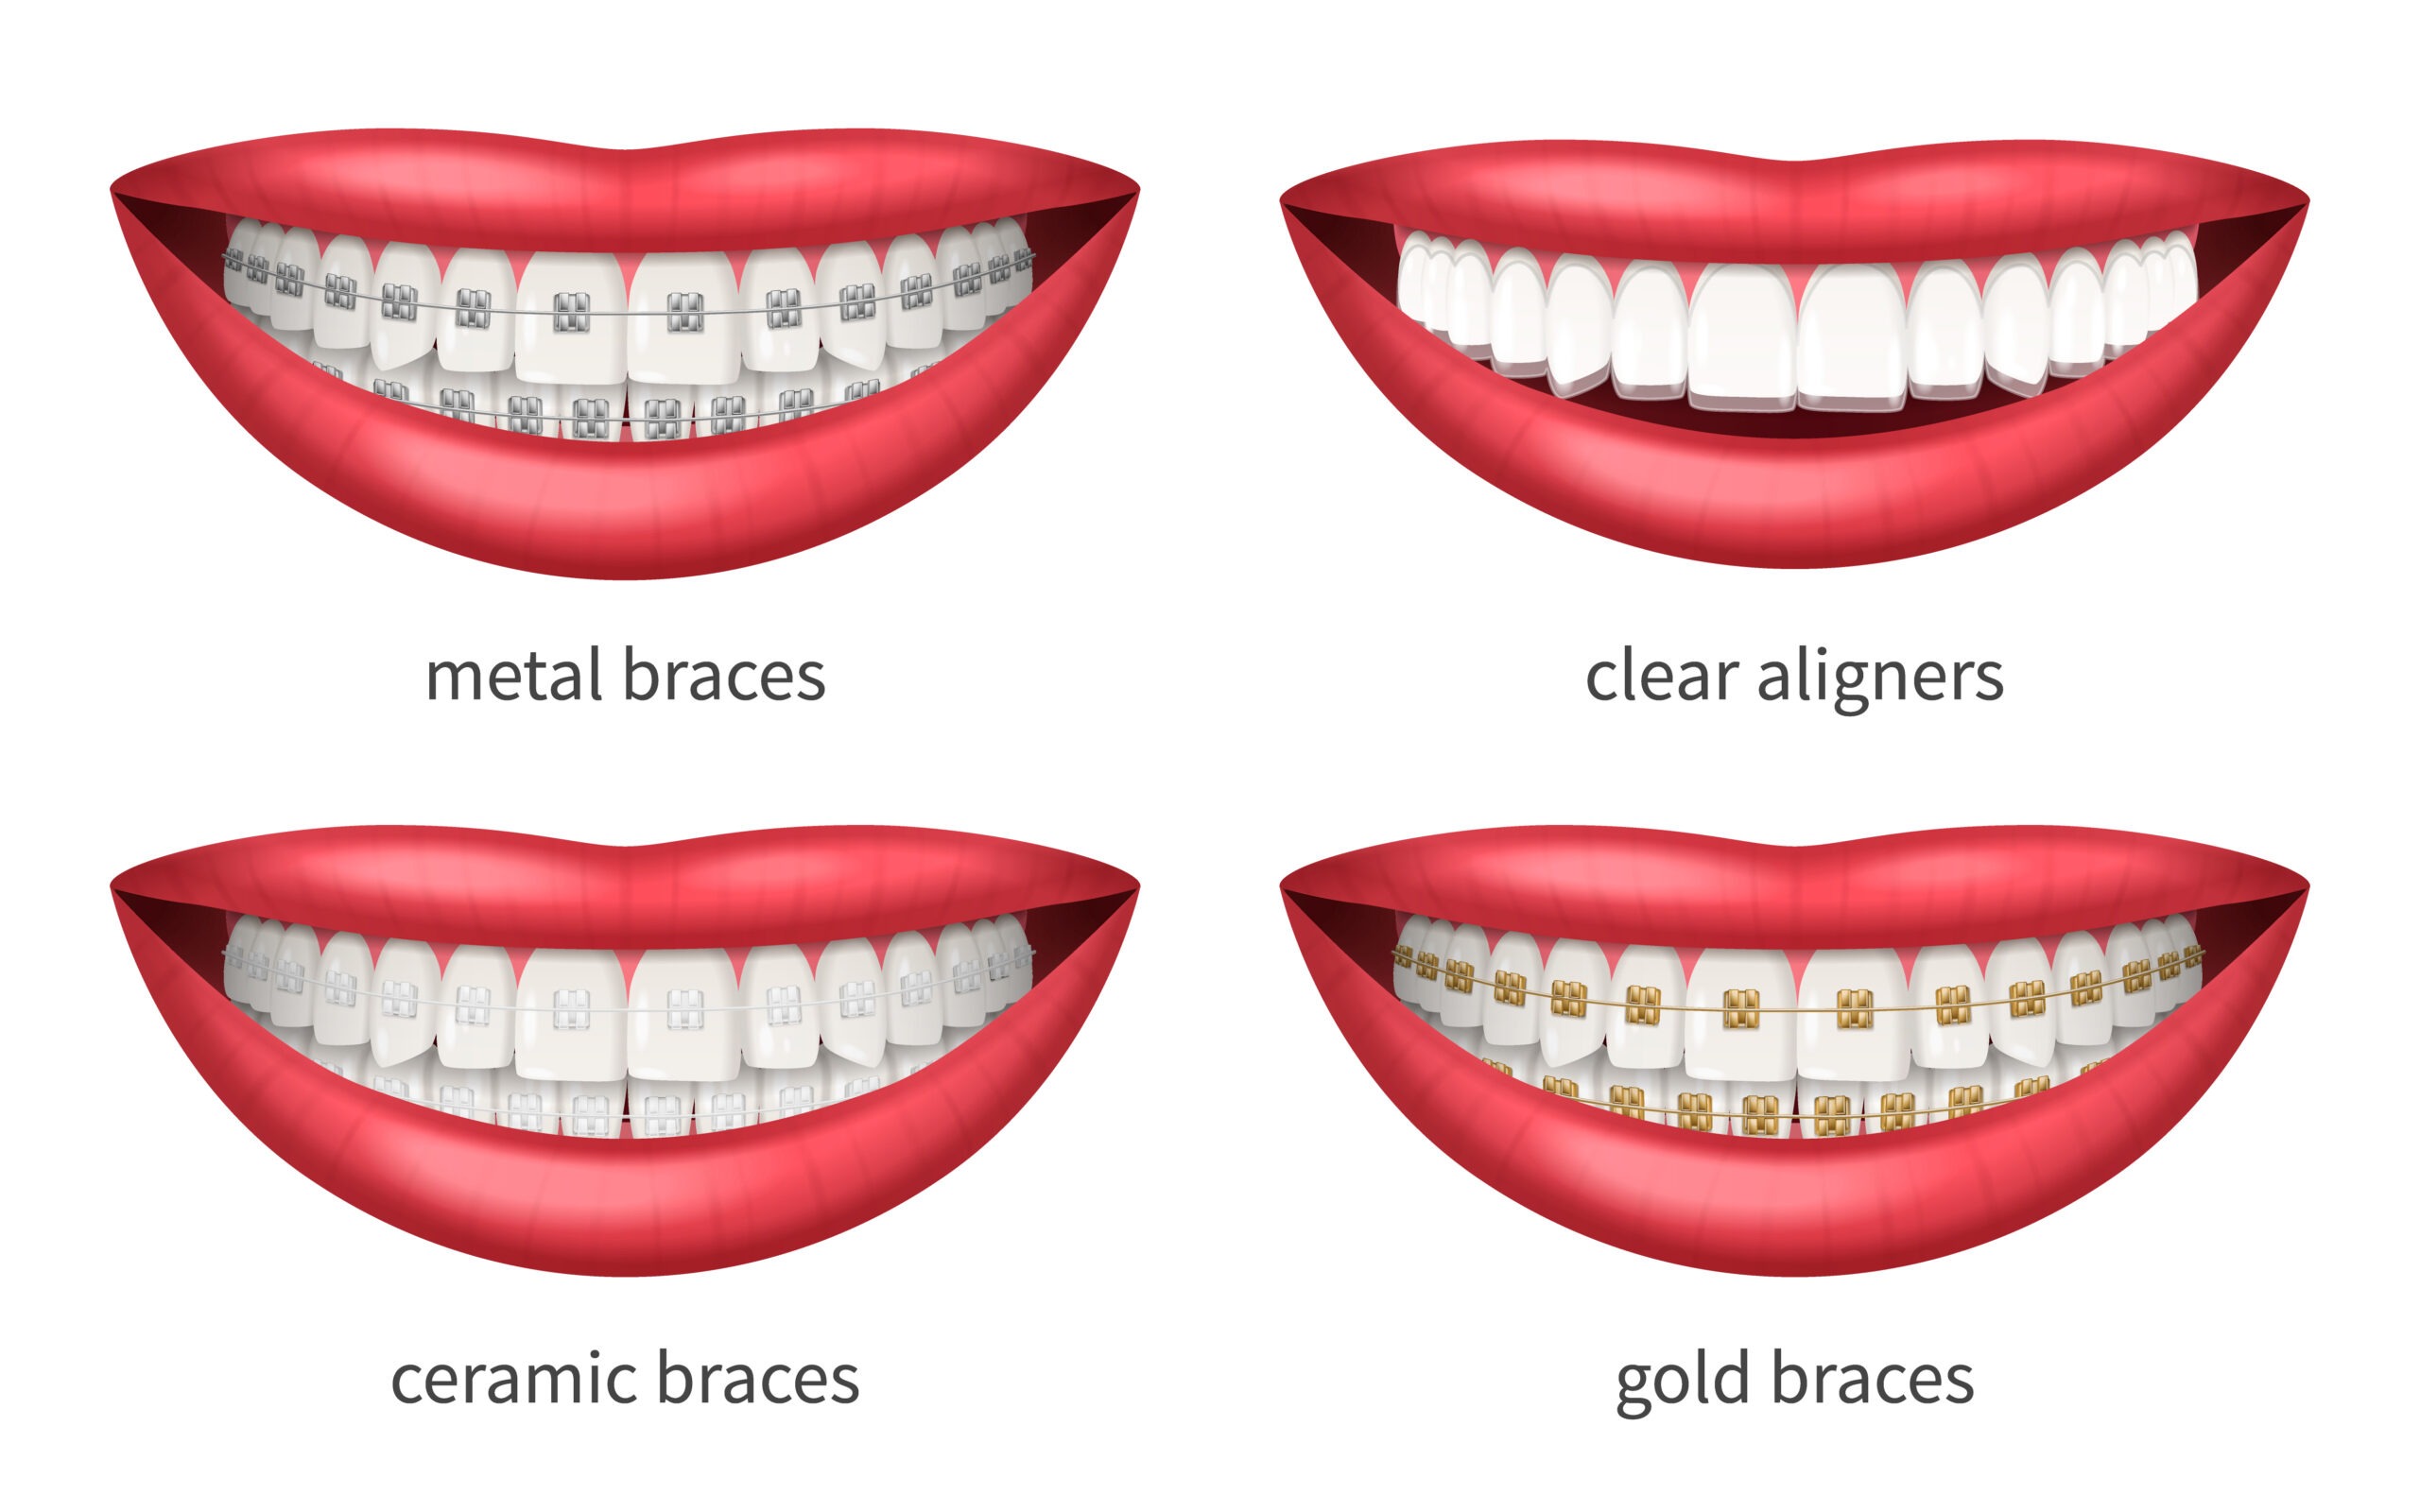 Tips for Successfully Wearing Braces